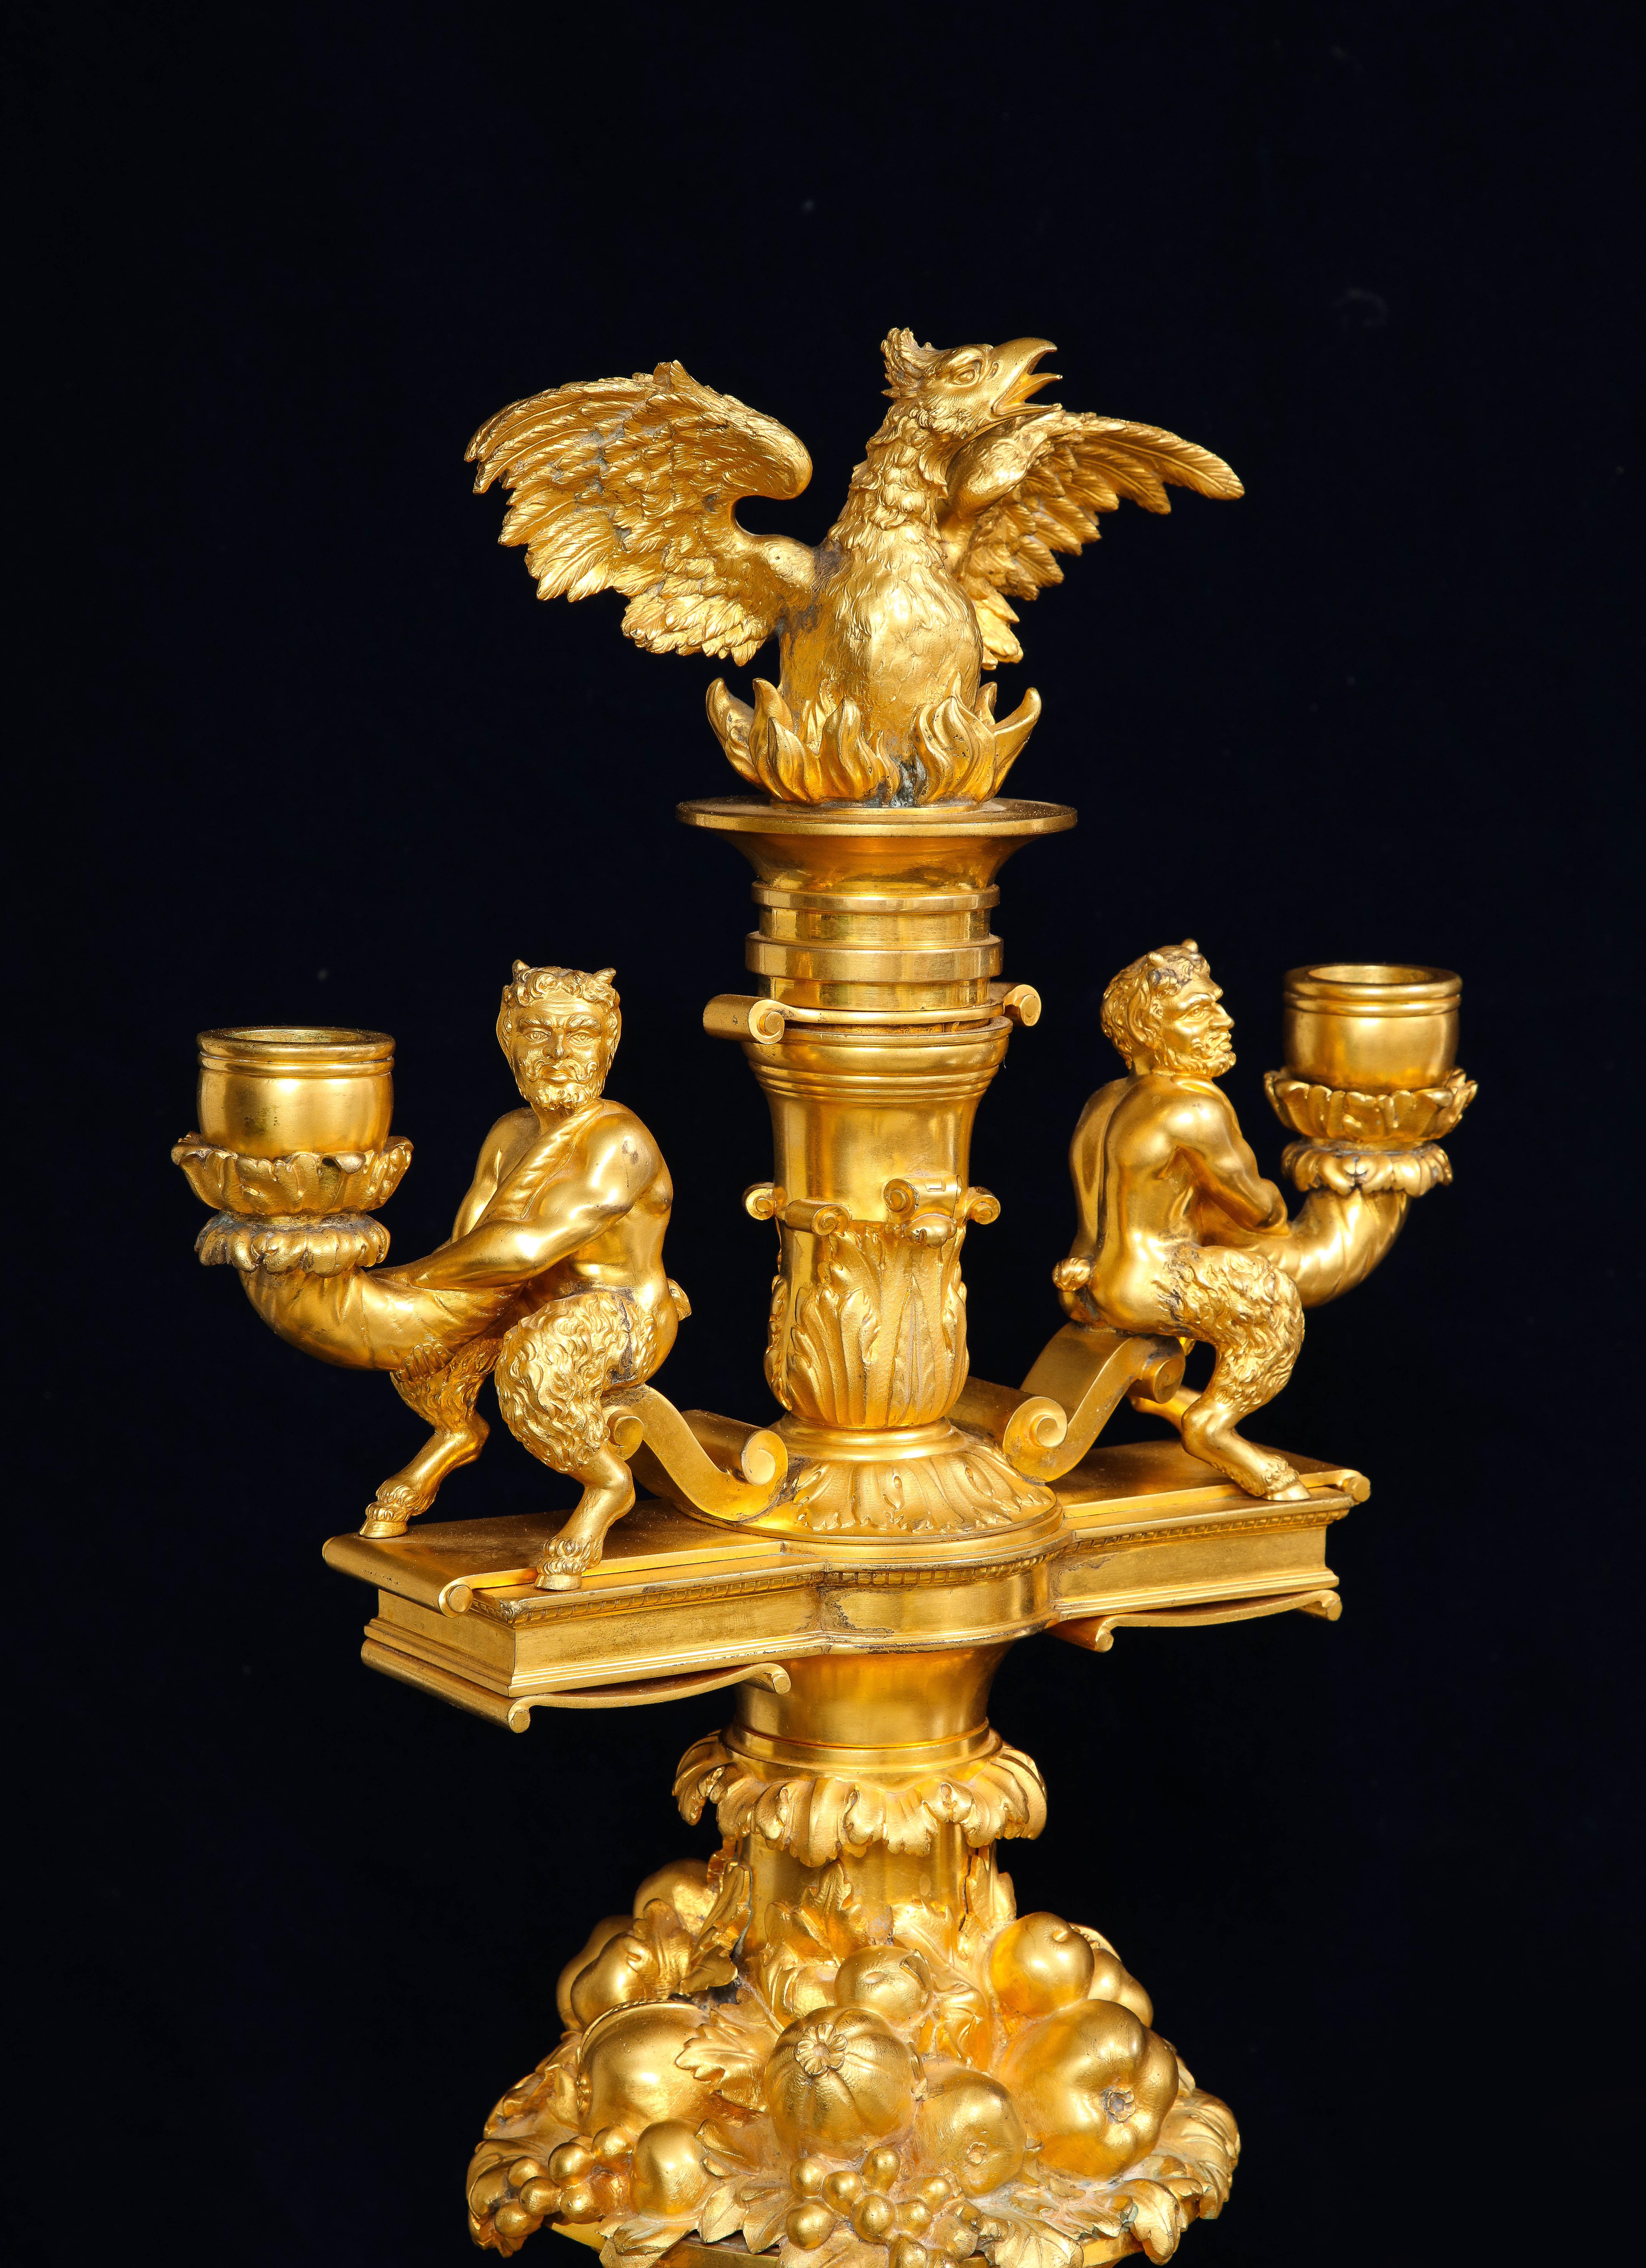 Marvelous Pair of 19th C. French Ormolu Four Arm Candelabras, Signed P. Canaux For Sale 3